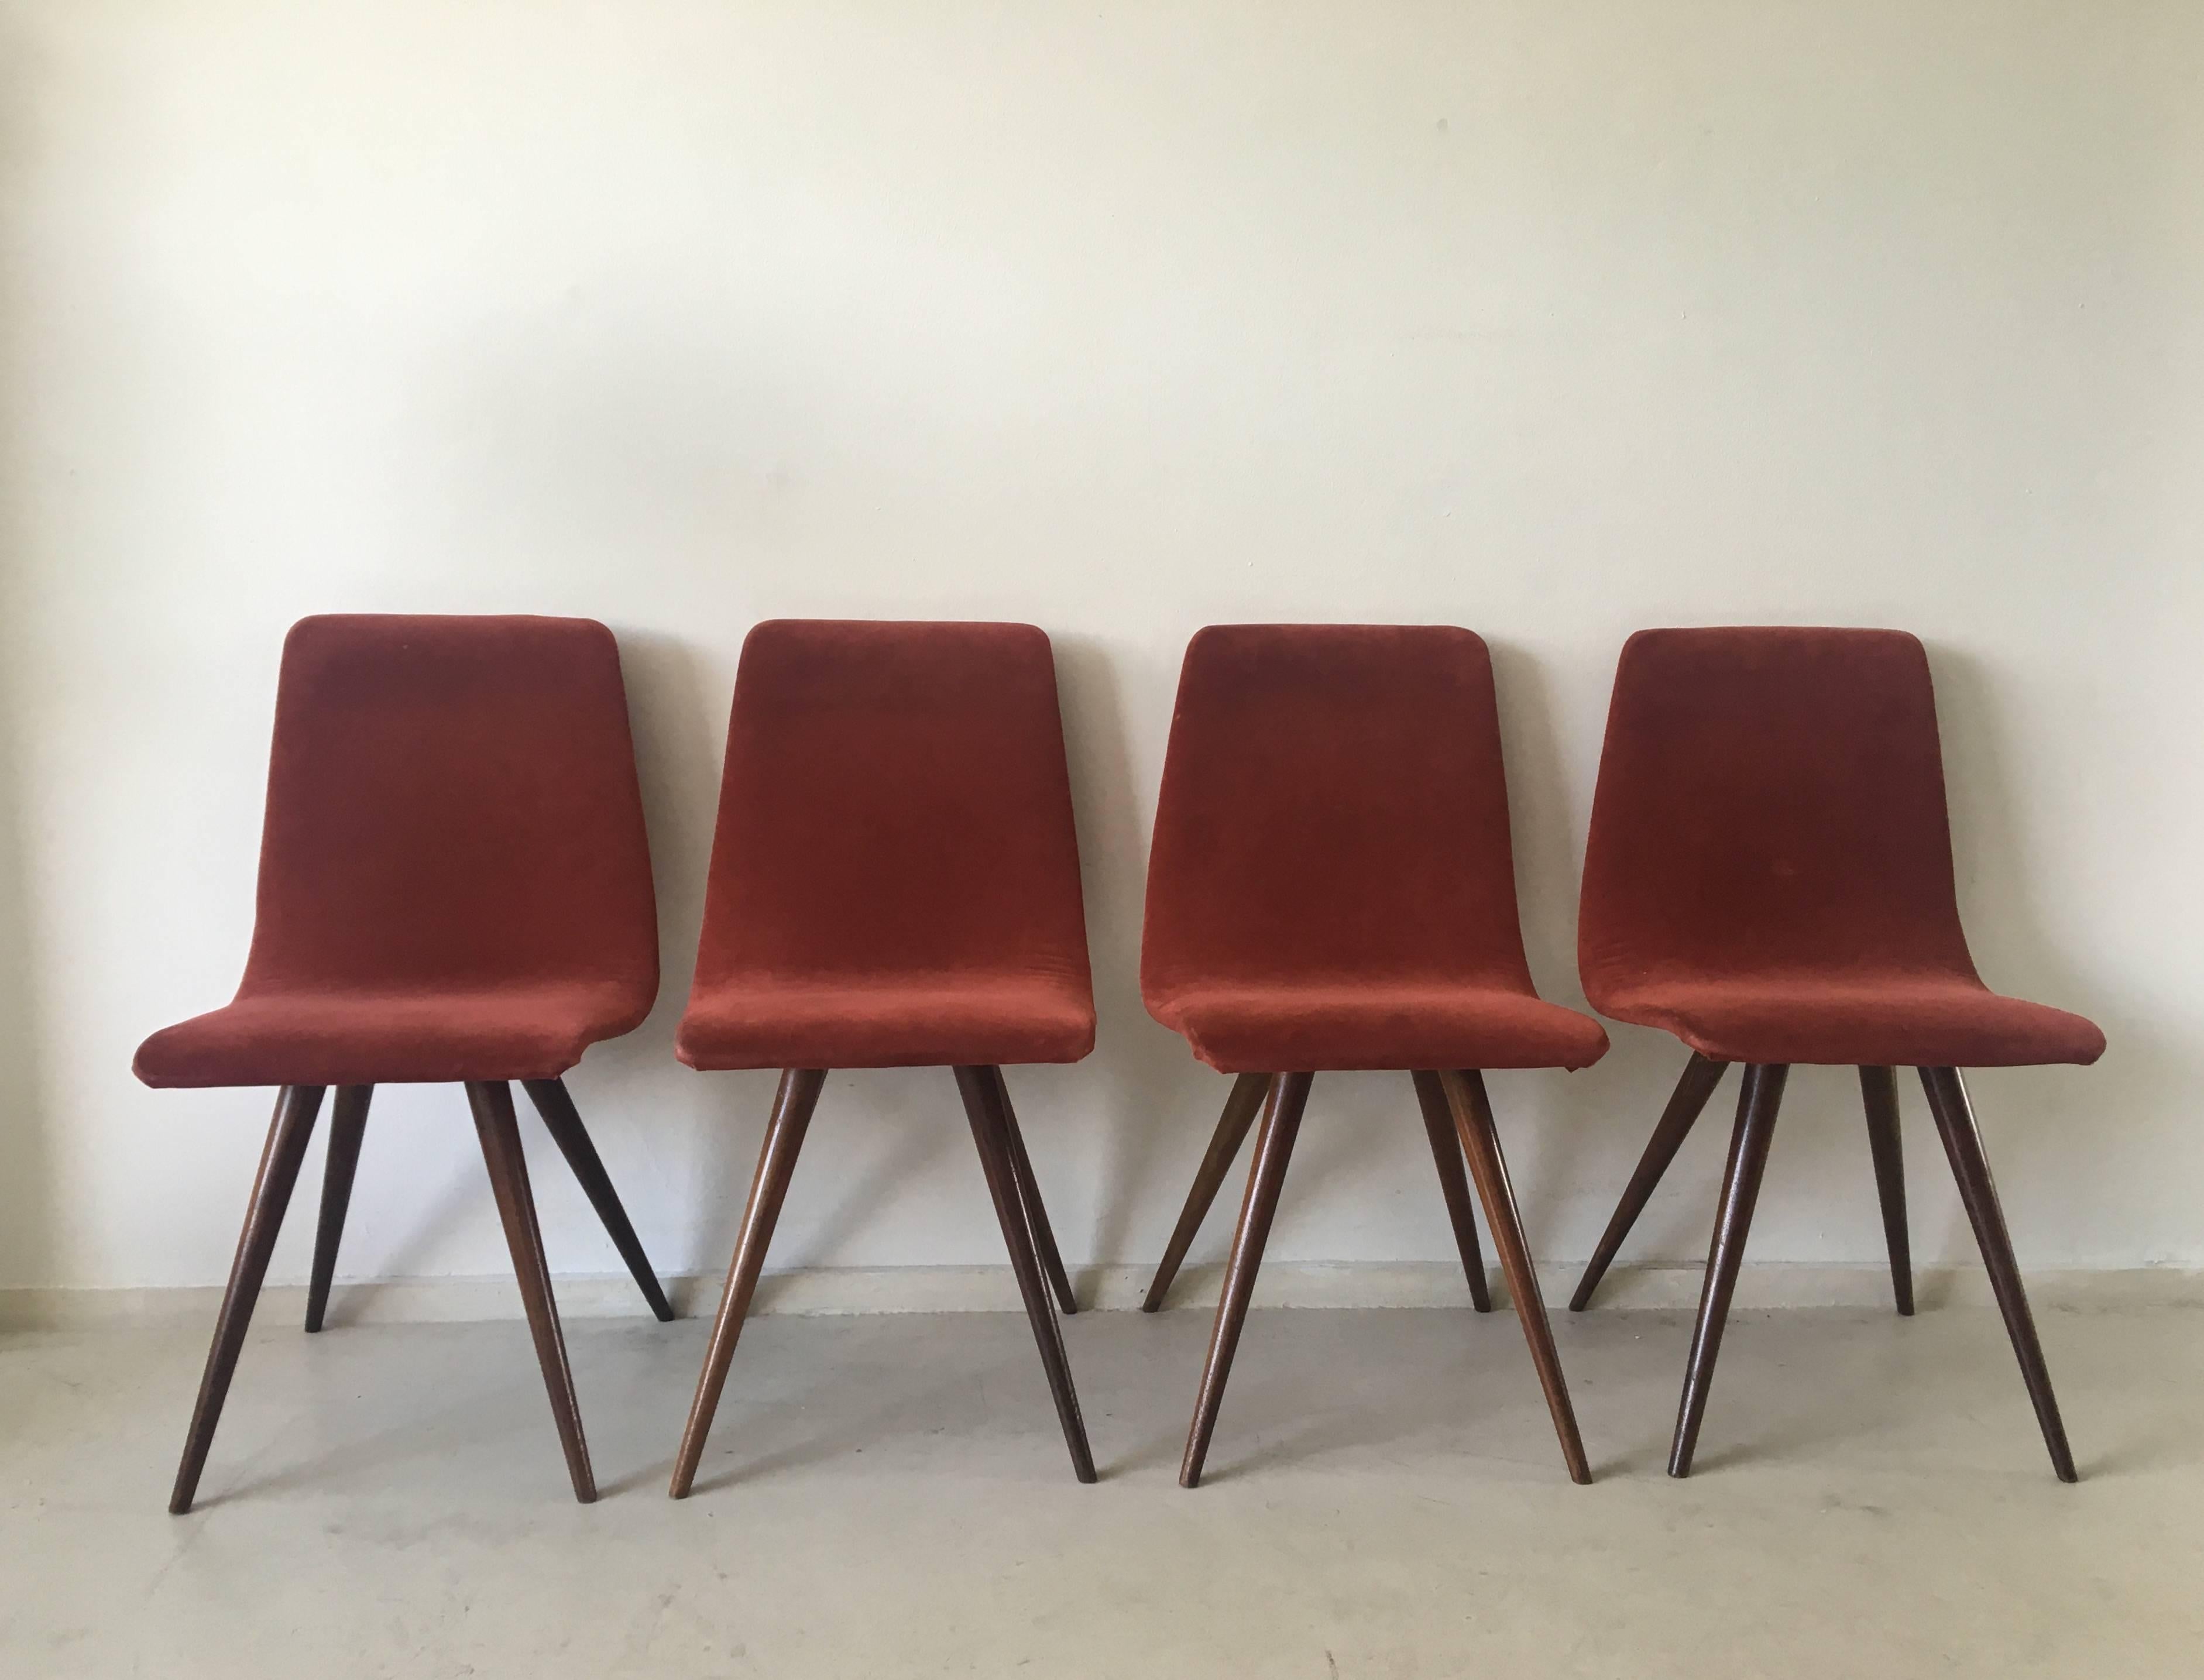 This set of four dining chairs were designed in The Netherlands by, most likely, G.J. Van Os circa the 1950s. The chairs feature a flexible seating with red/red brown fabric, we think they might have been reupholstered with it. Their unusual feet